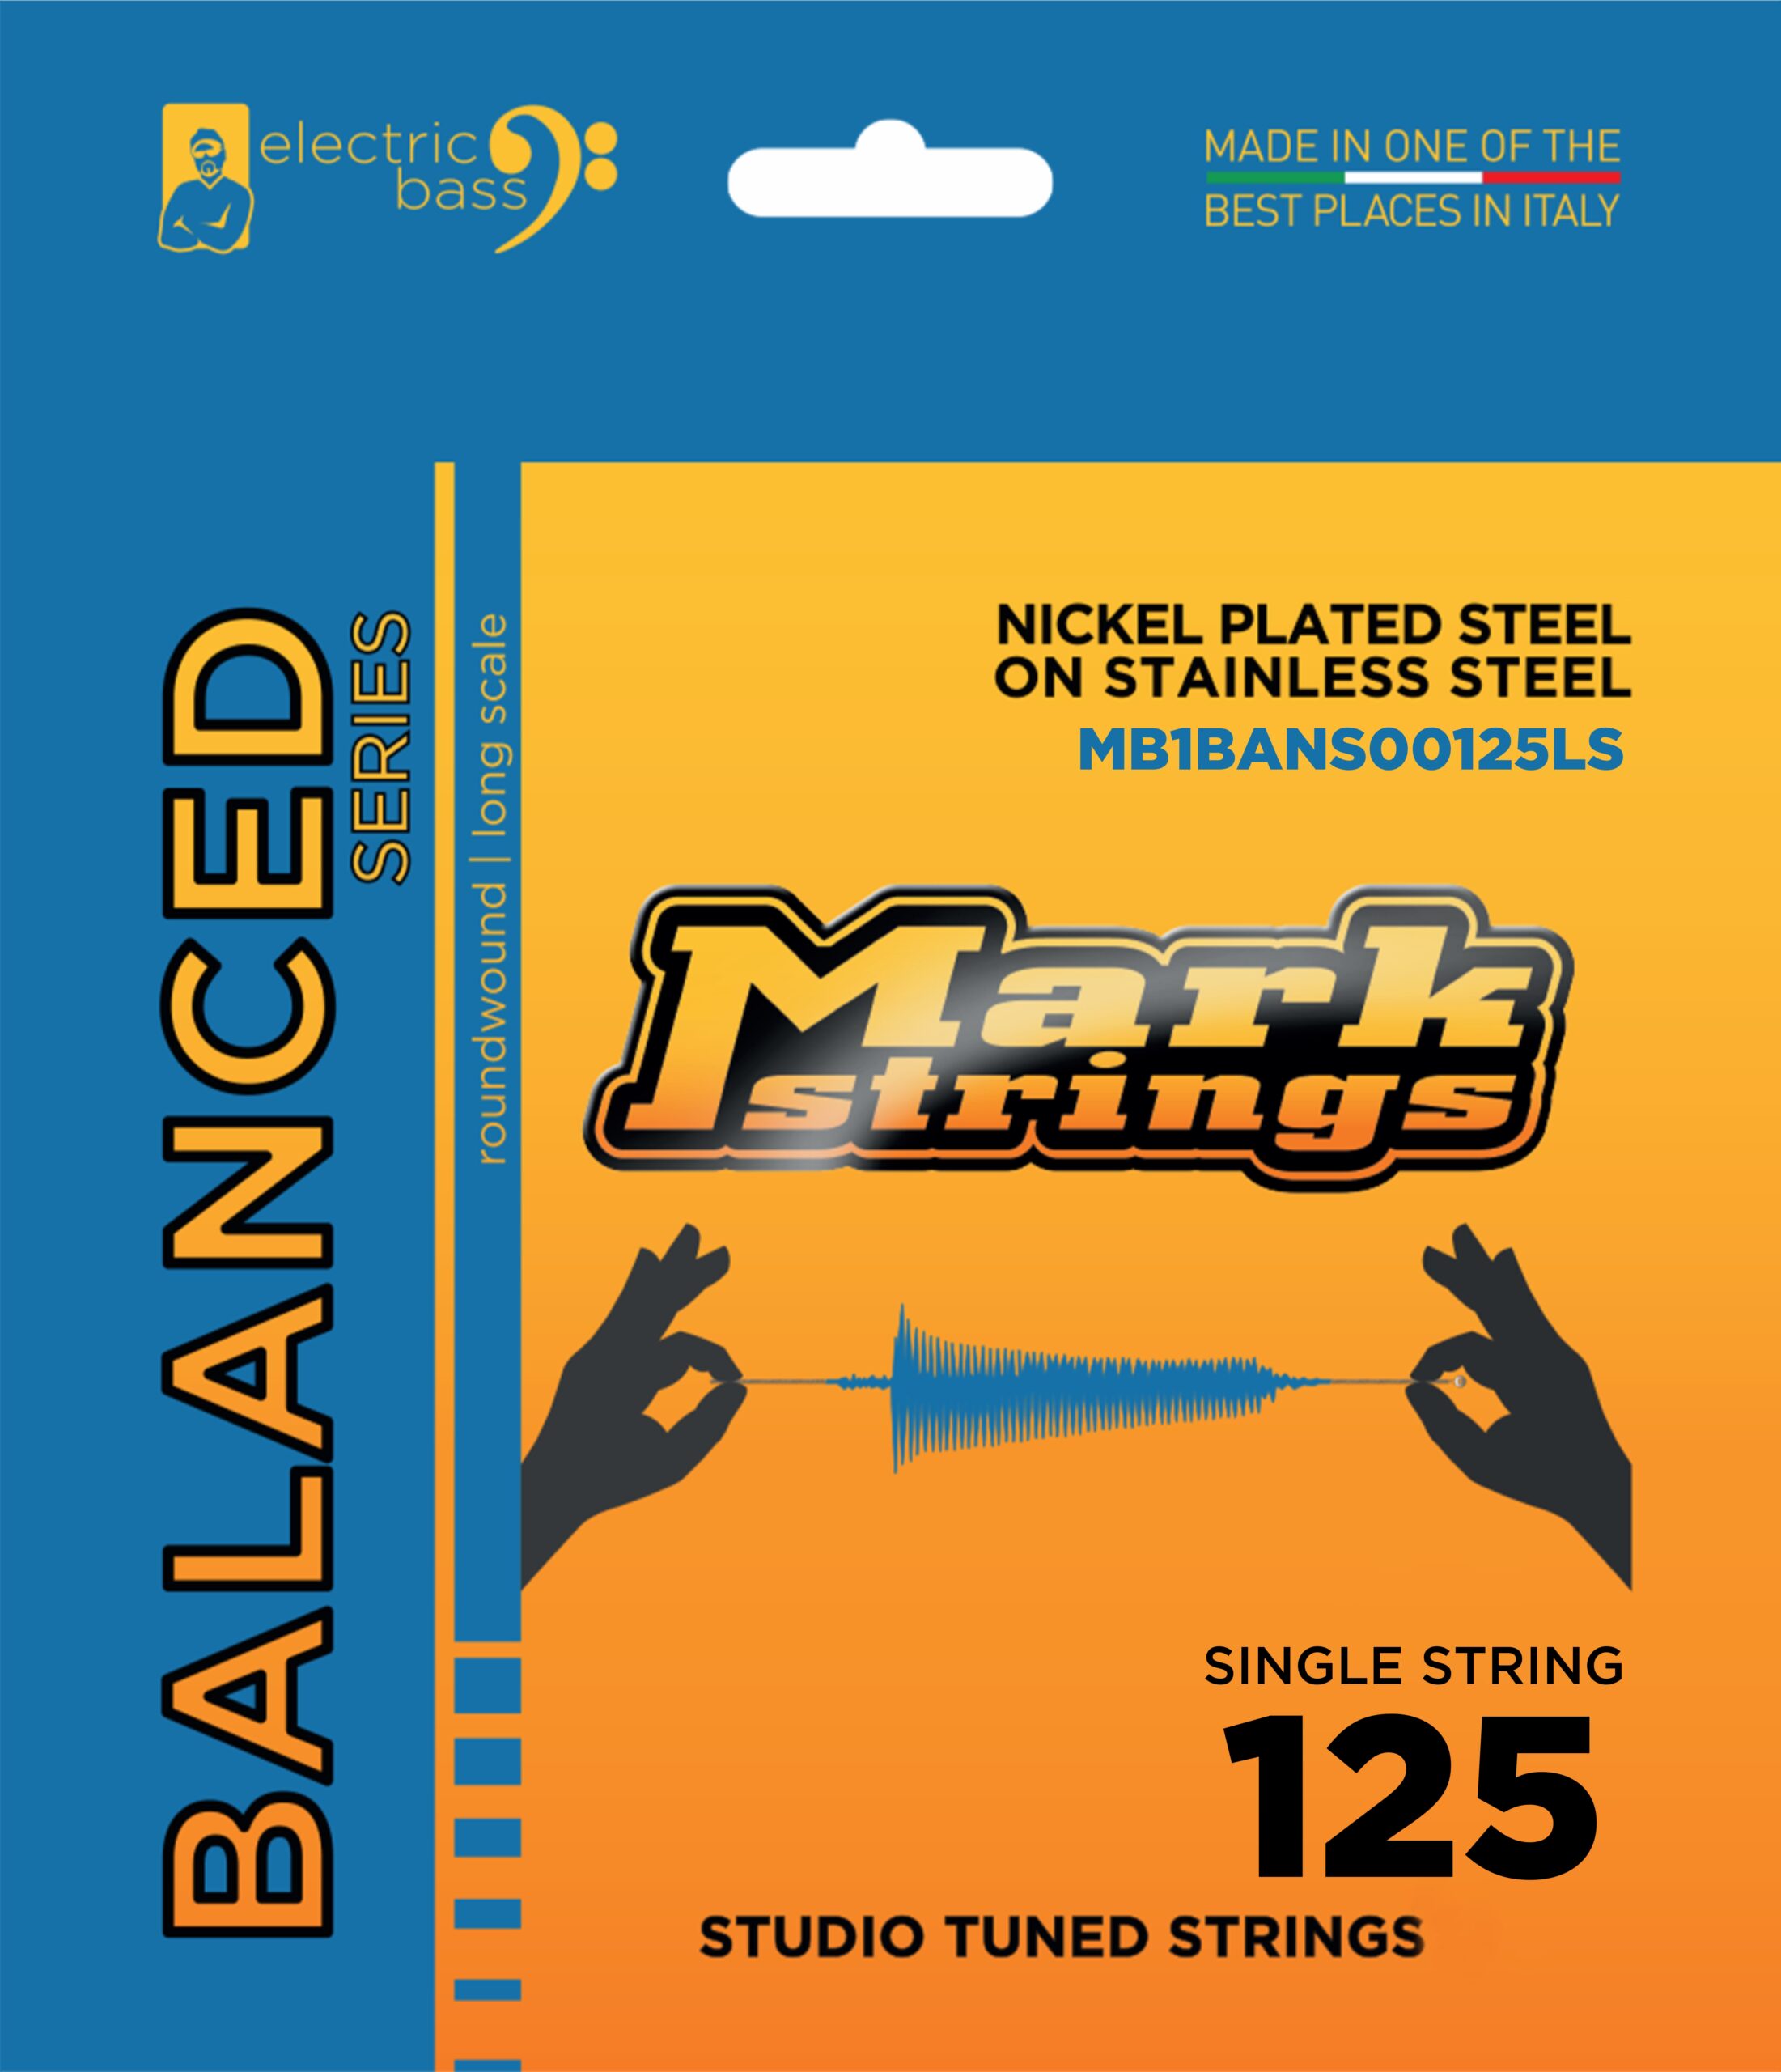 BALANCED Series – Electric bass nickel plated steel on stainless steel